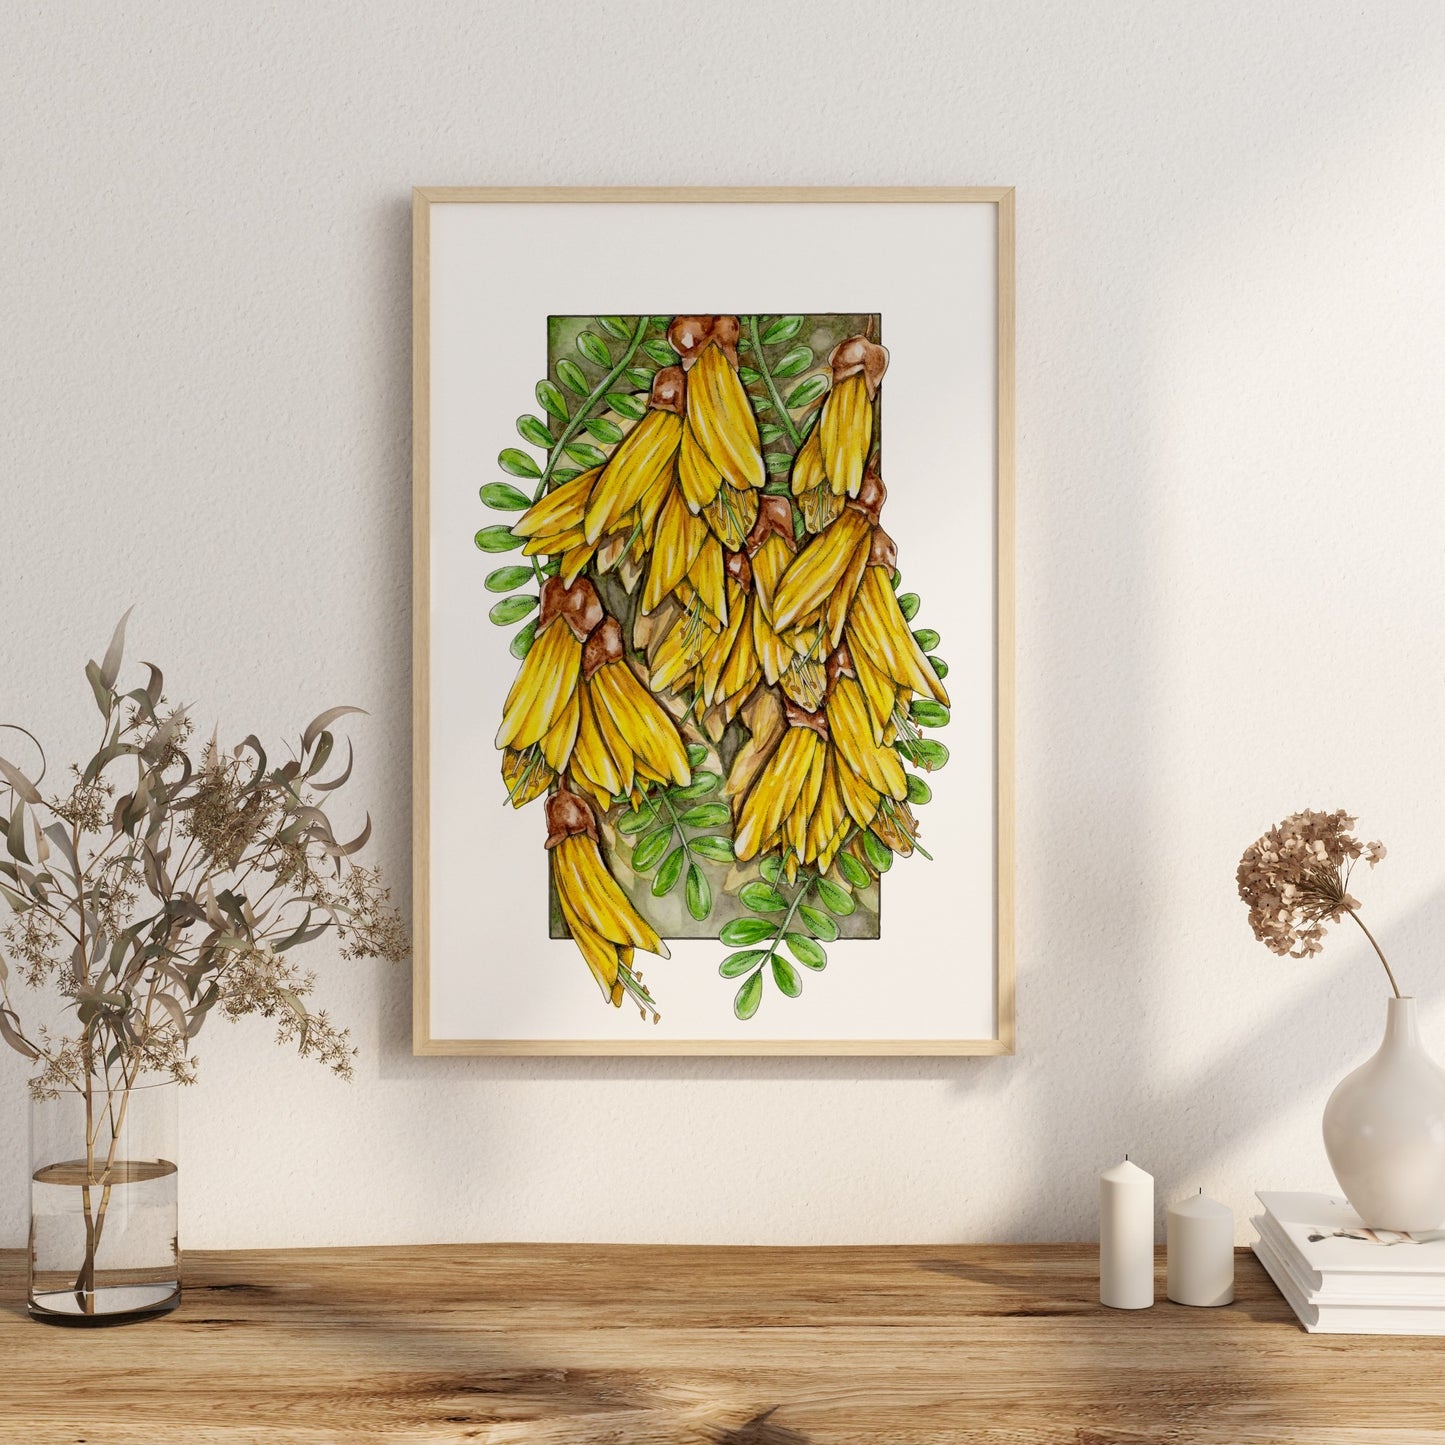 Artwork featuring yellow kowhai flowers cascading out of a frame amongst the green leaves.